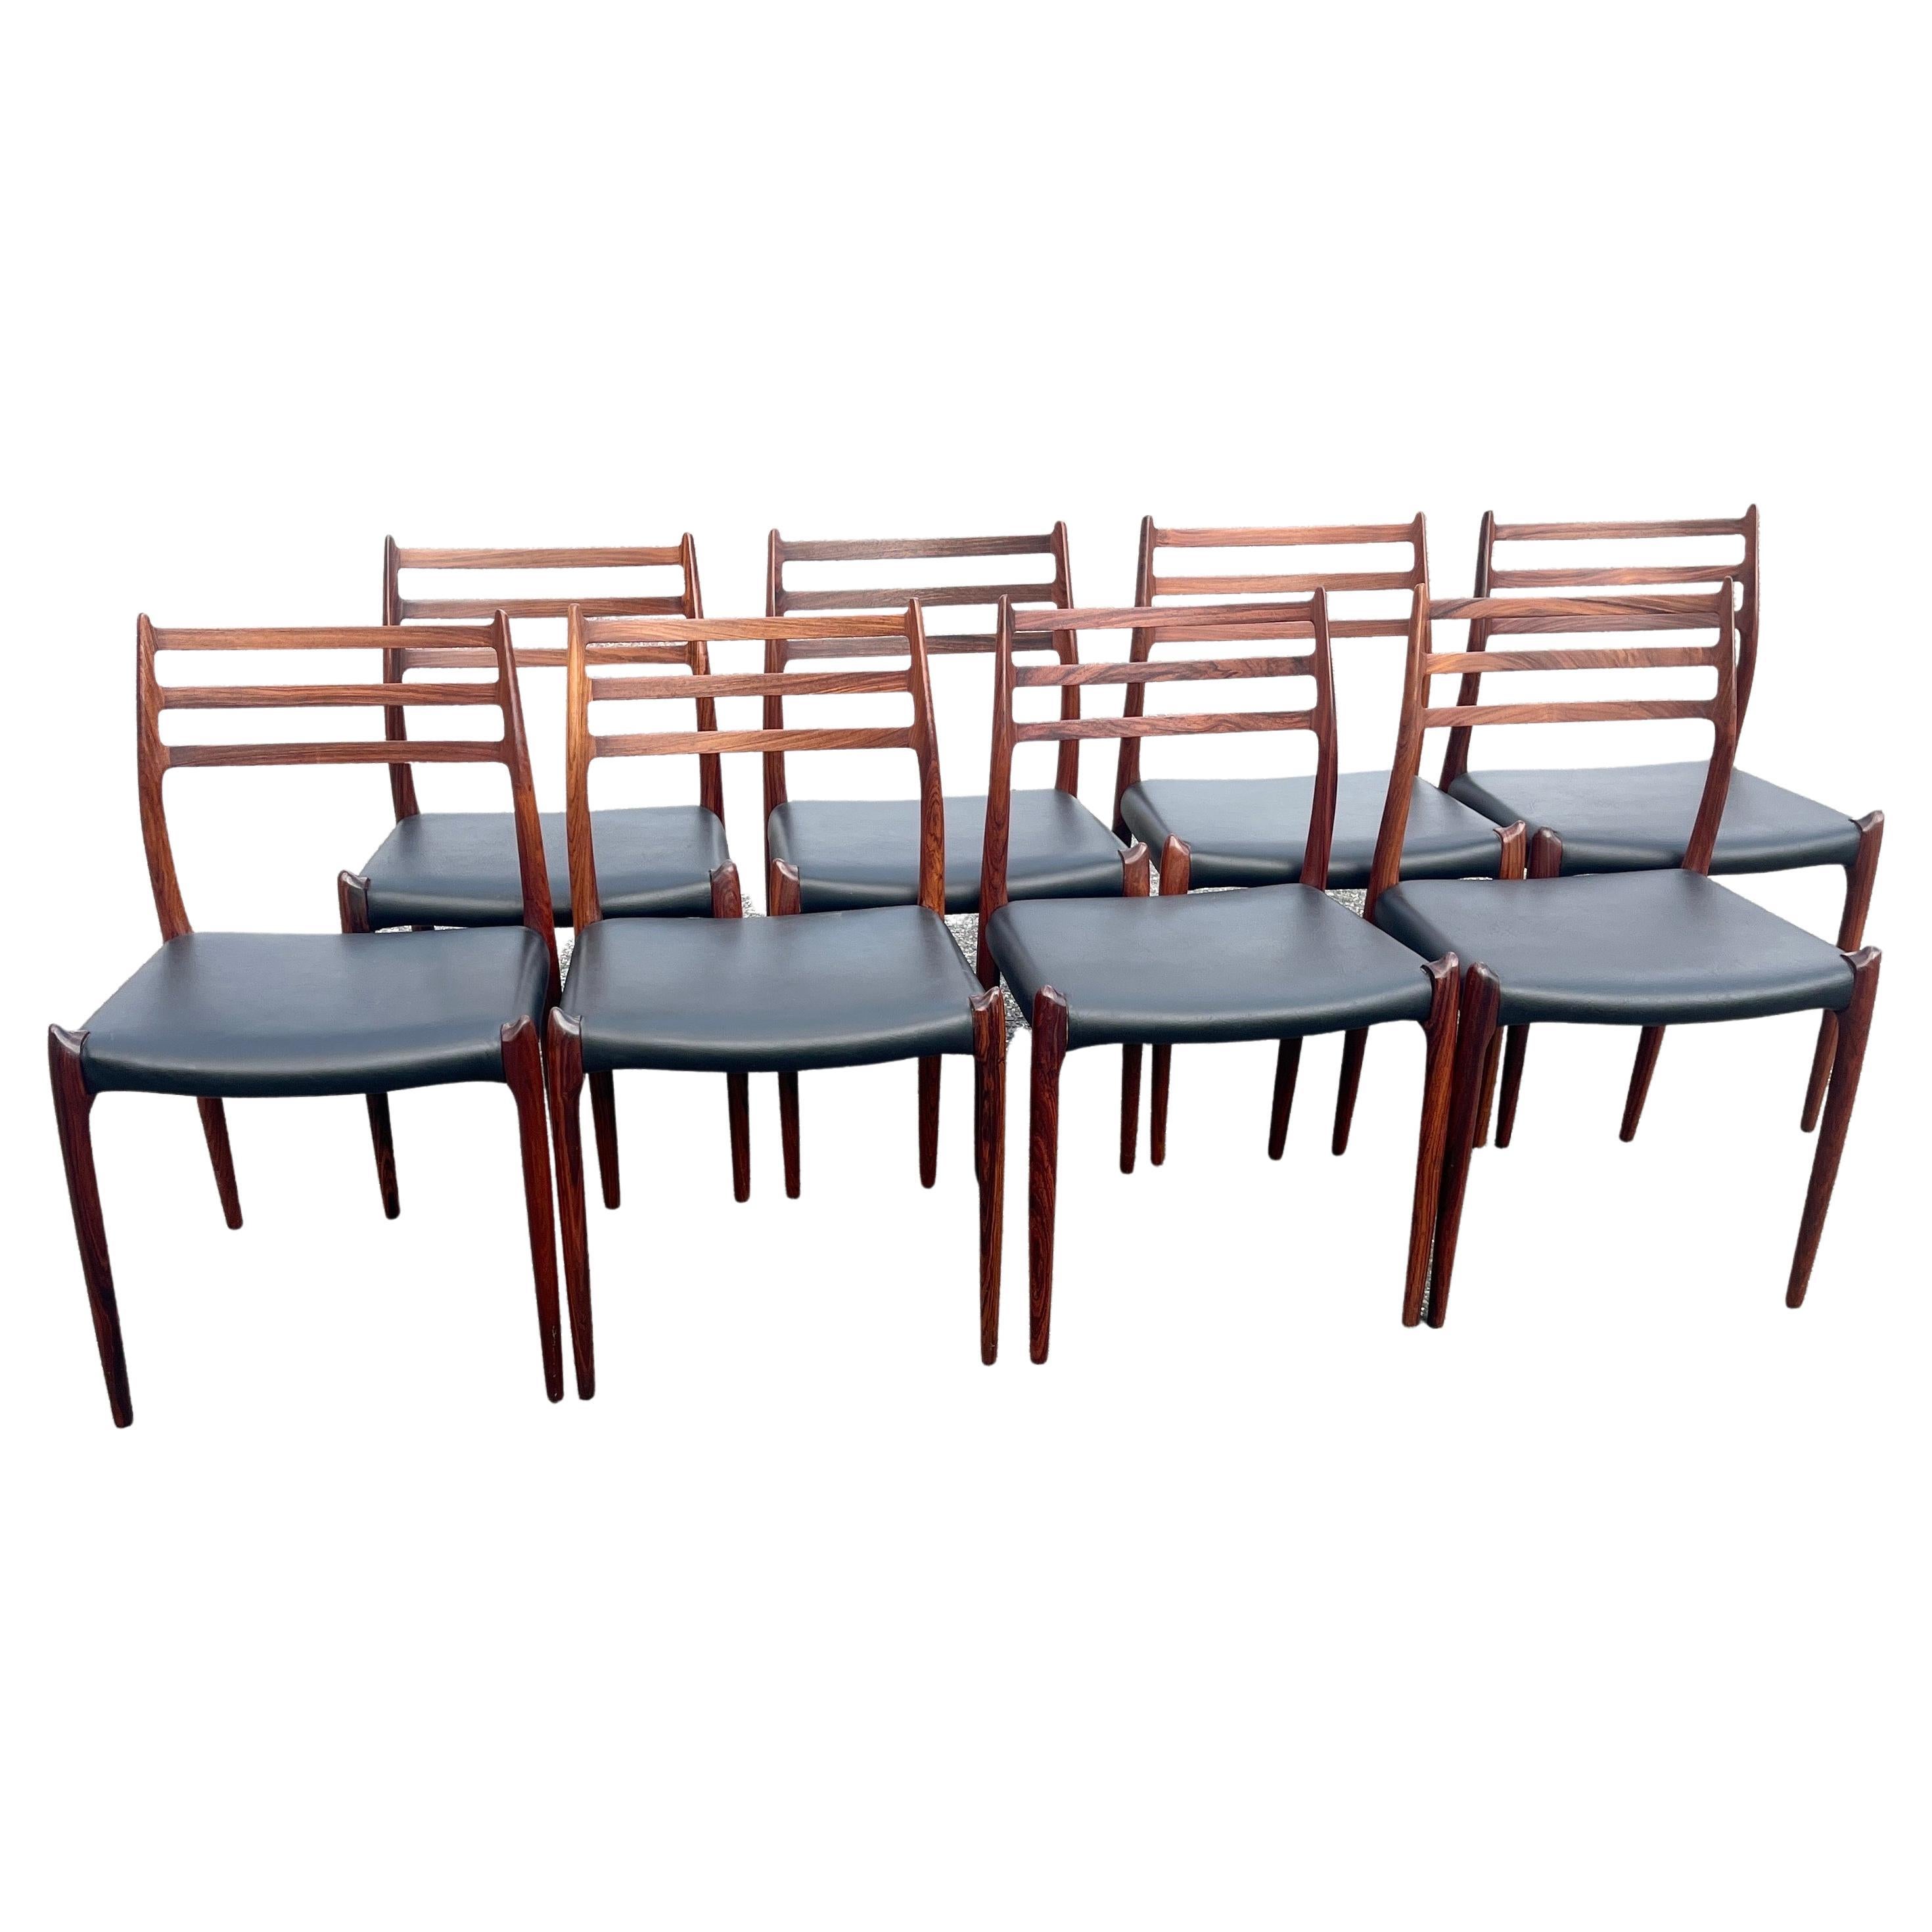 Set of 8 Danish Model 78 Rosewood Dining Chairs, by Niels O. Møller  1